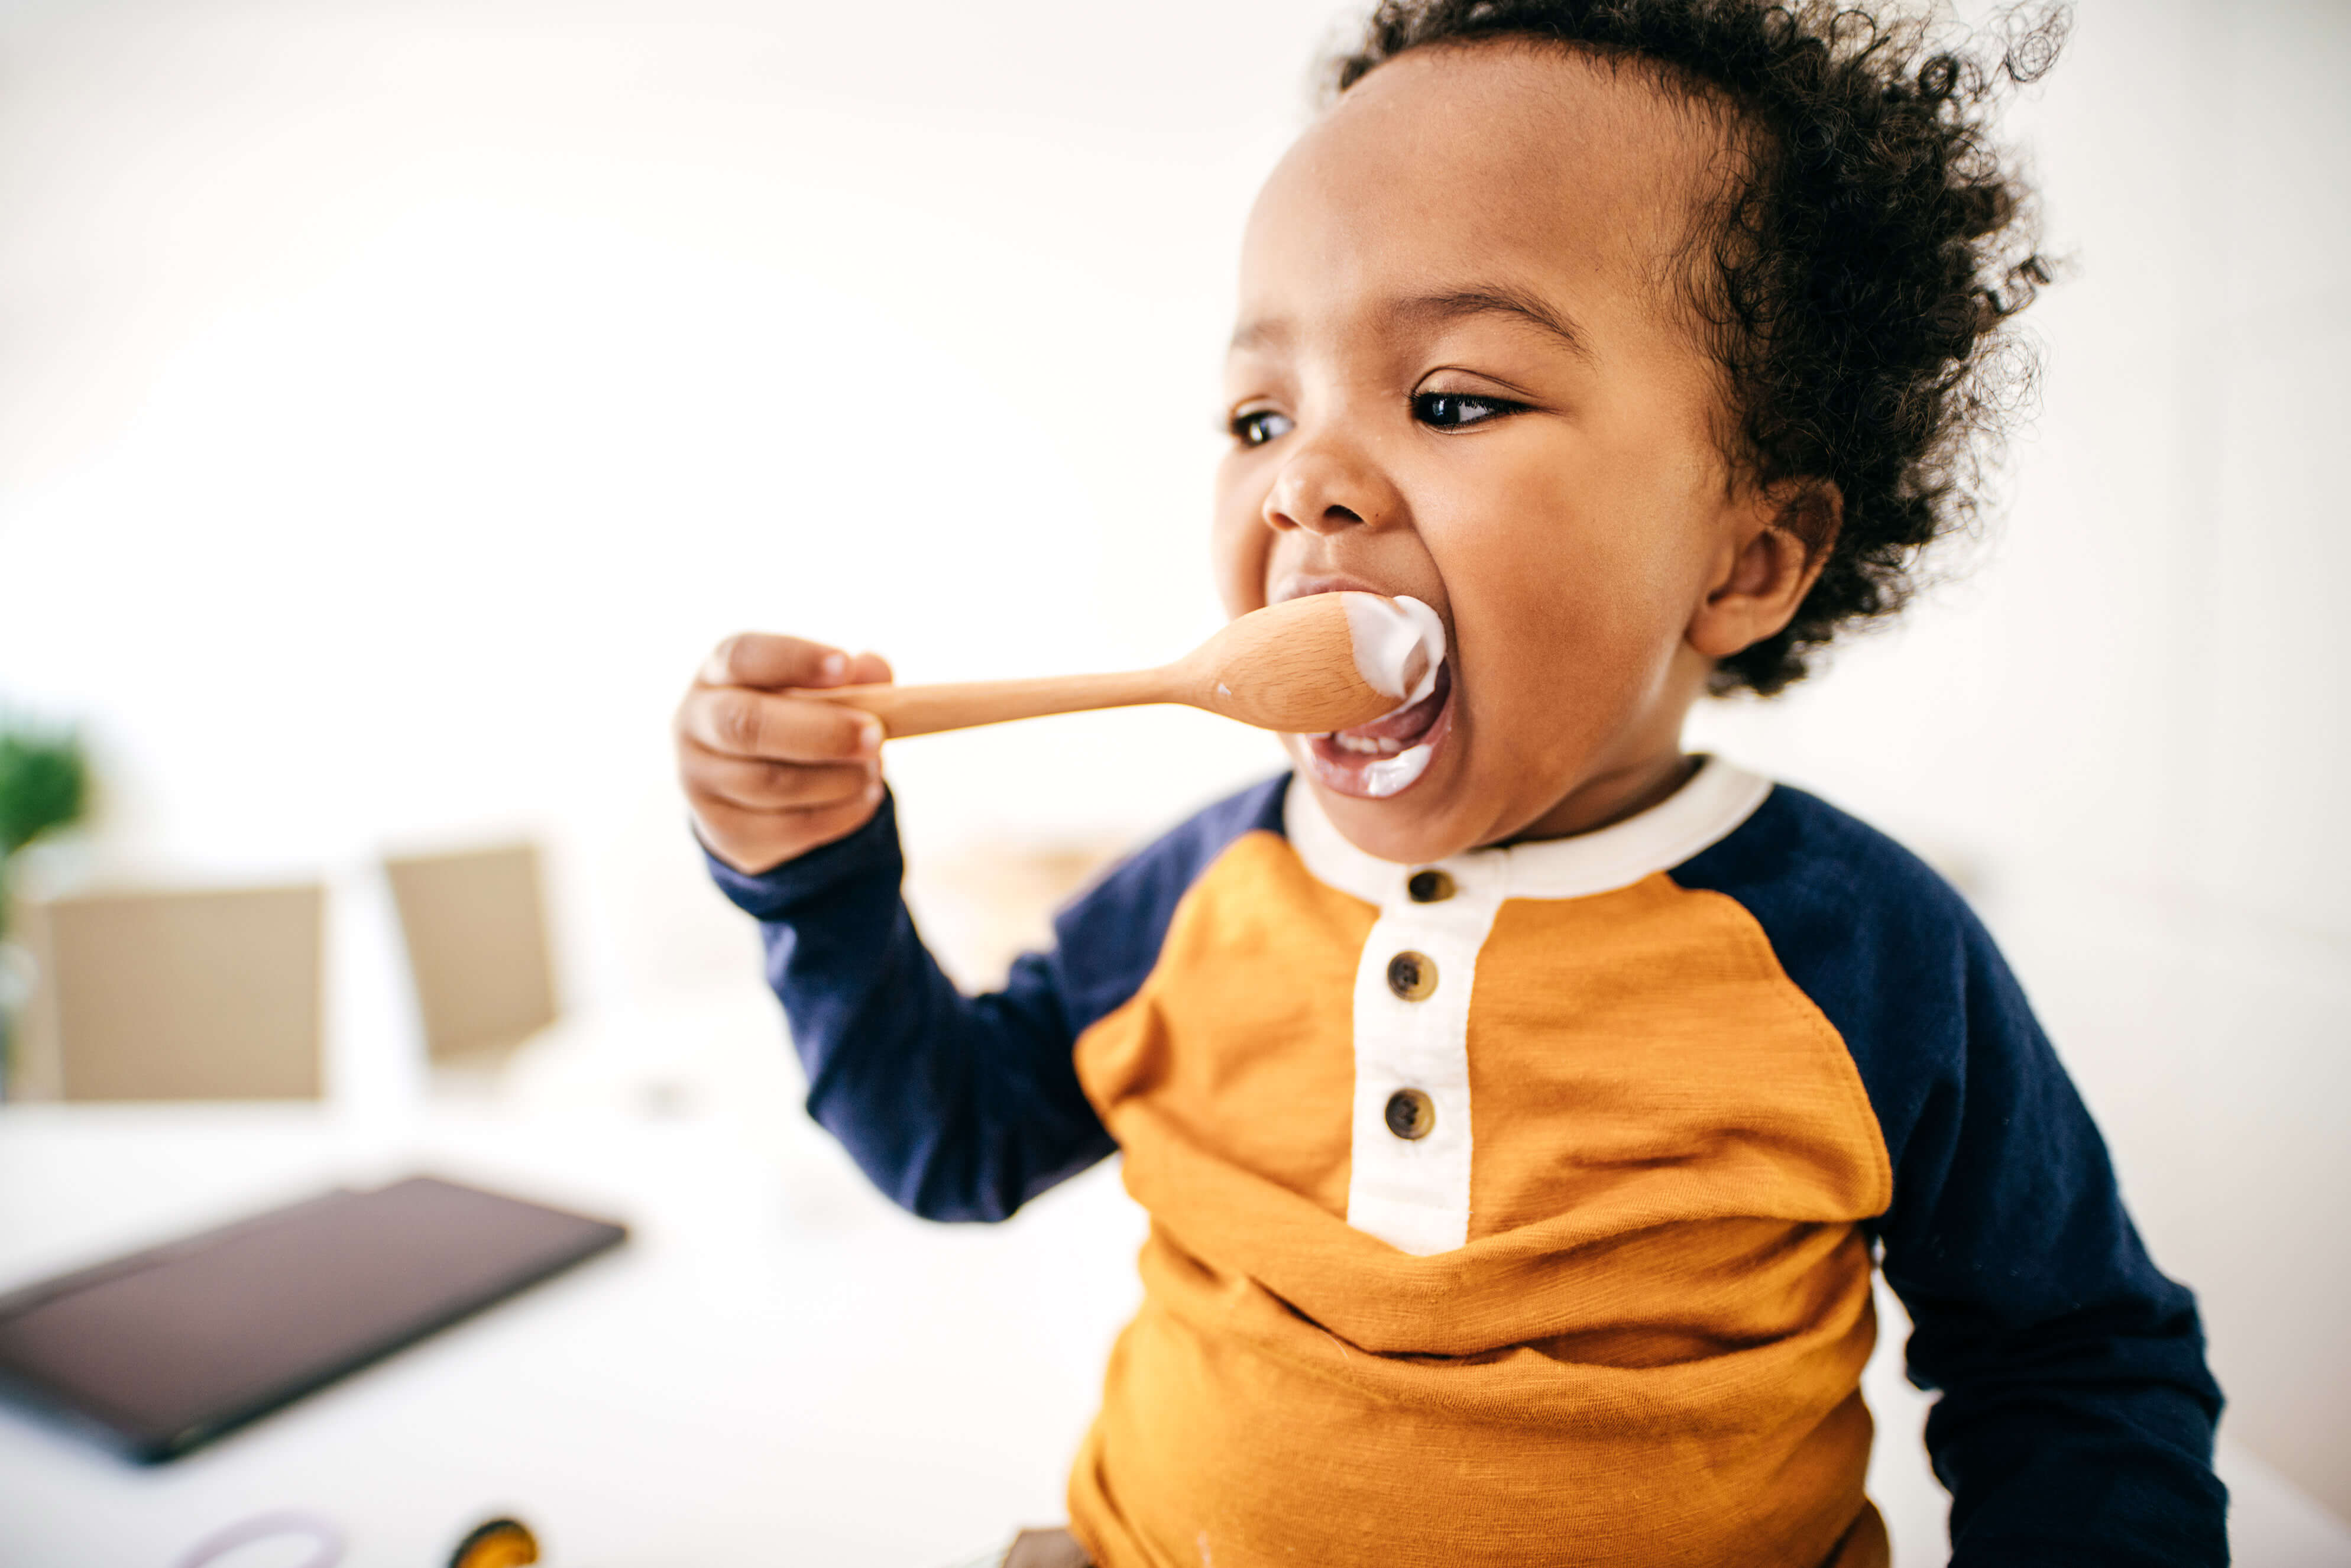 Toddler eating from a spoon